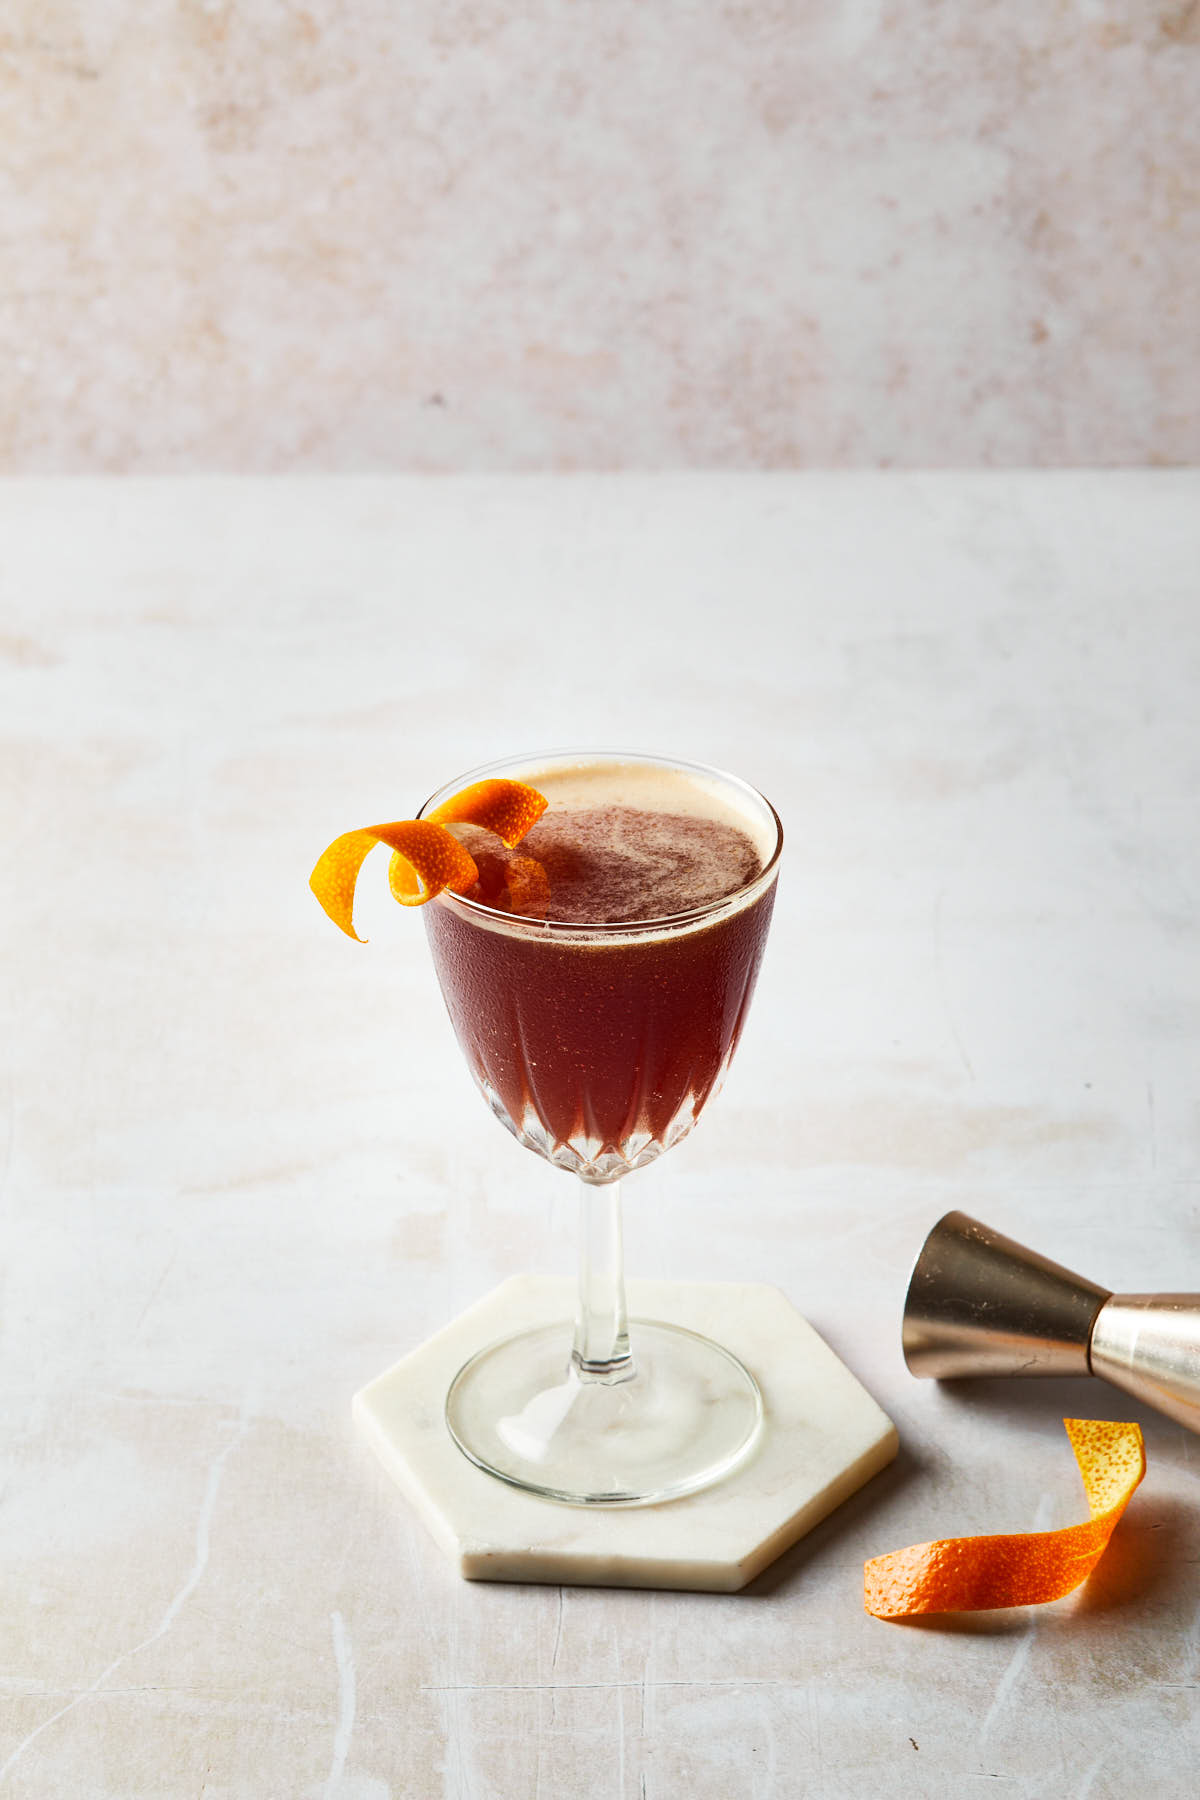 A blood and sand cocktail garnished with an orange twist. 